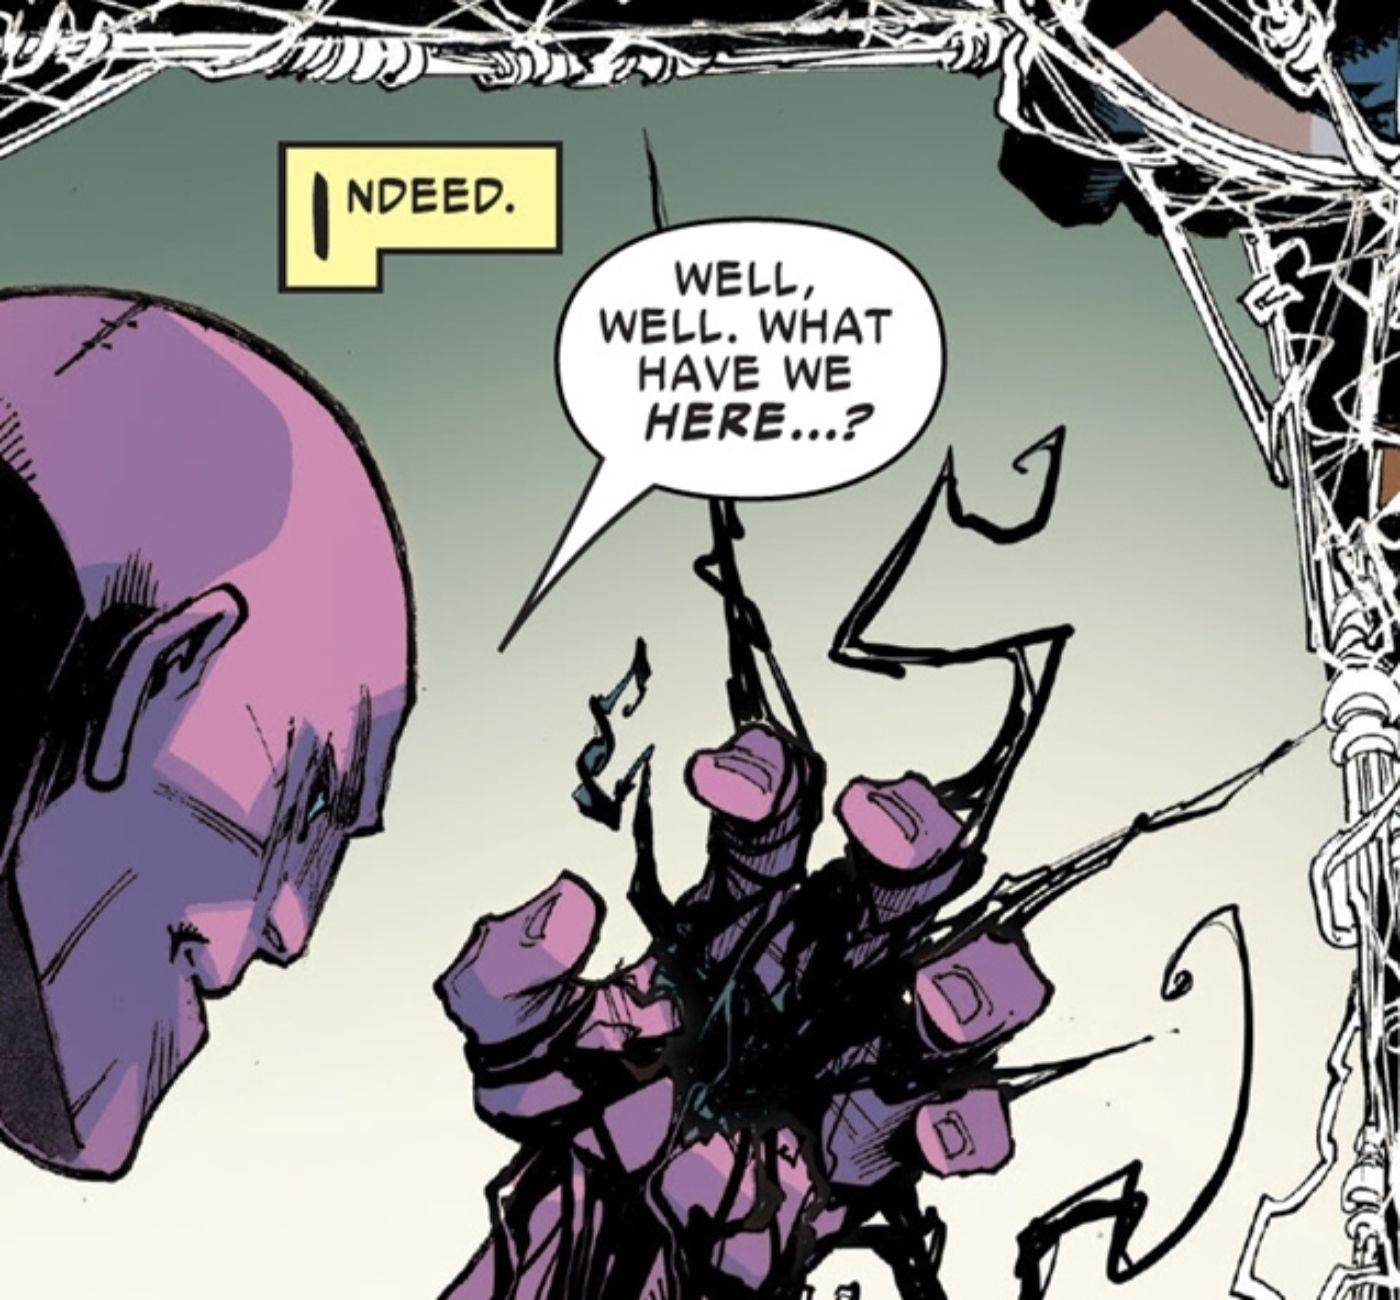 Killgrave stealing a piece of the Venom symbiote, holding it in his purple hand.